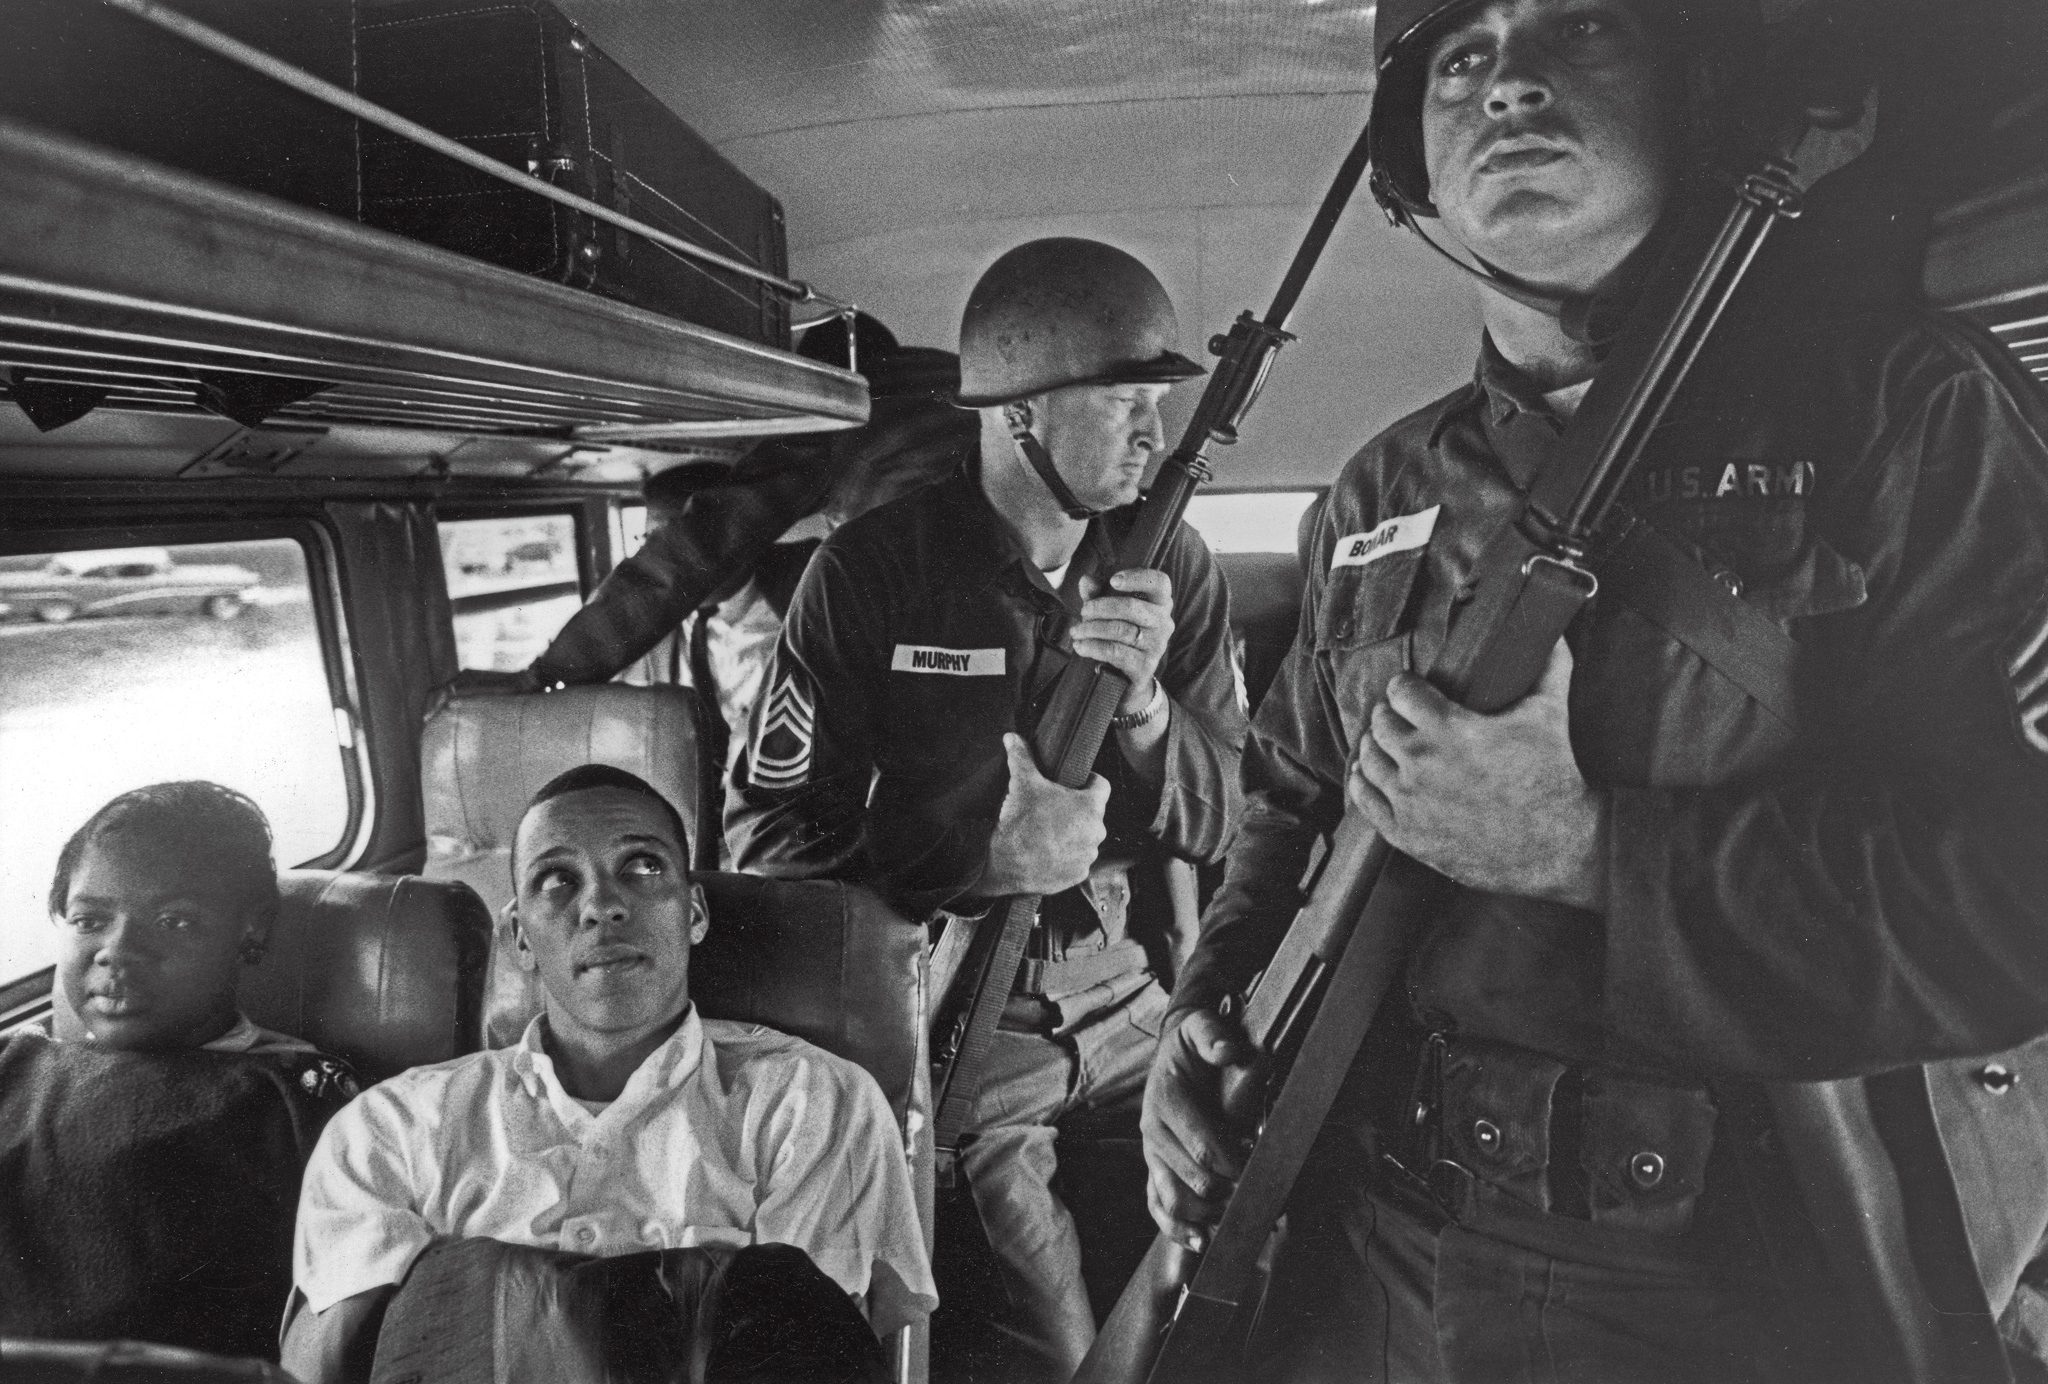 Julia Aaron and David Dennis with 25 other freedom riders are escorted by Mississippi National Guardsmen travelling from Montgomery, Ala. to Jackson, Miss., May 1961.